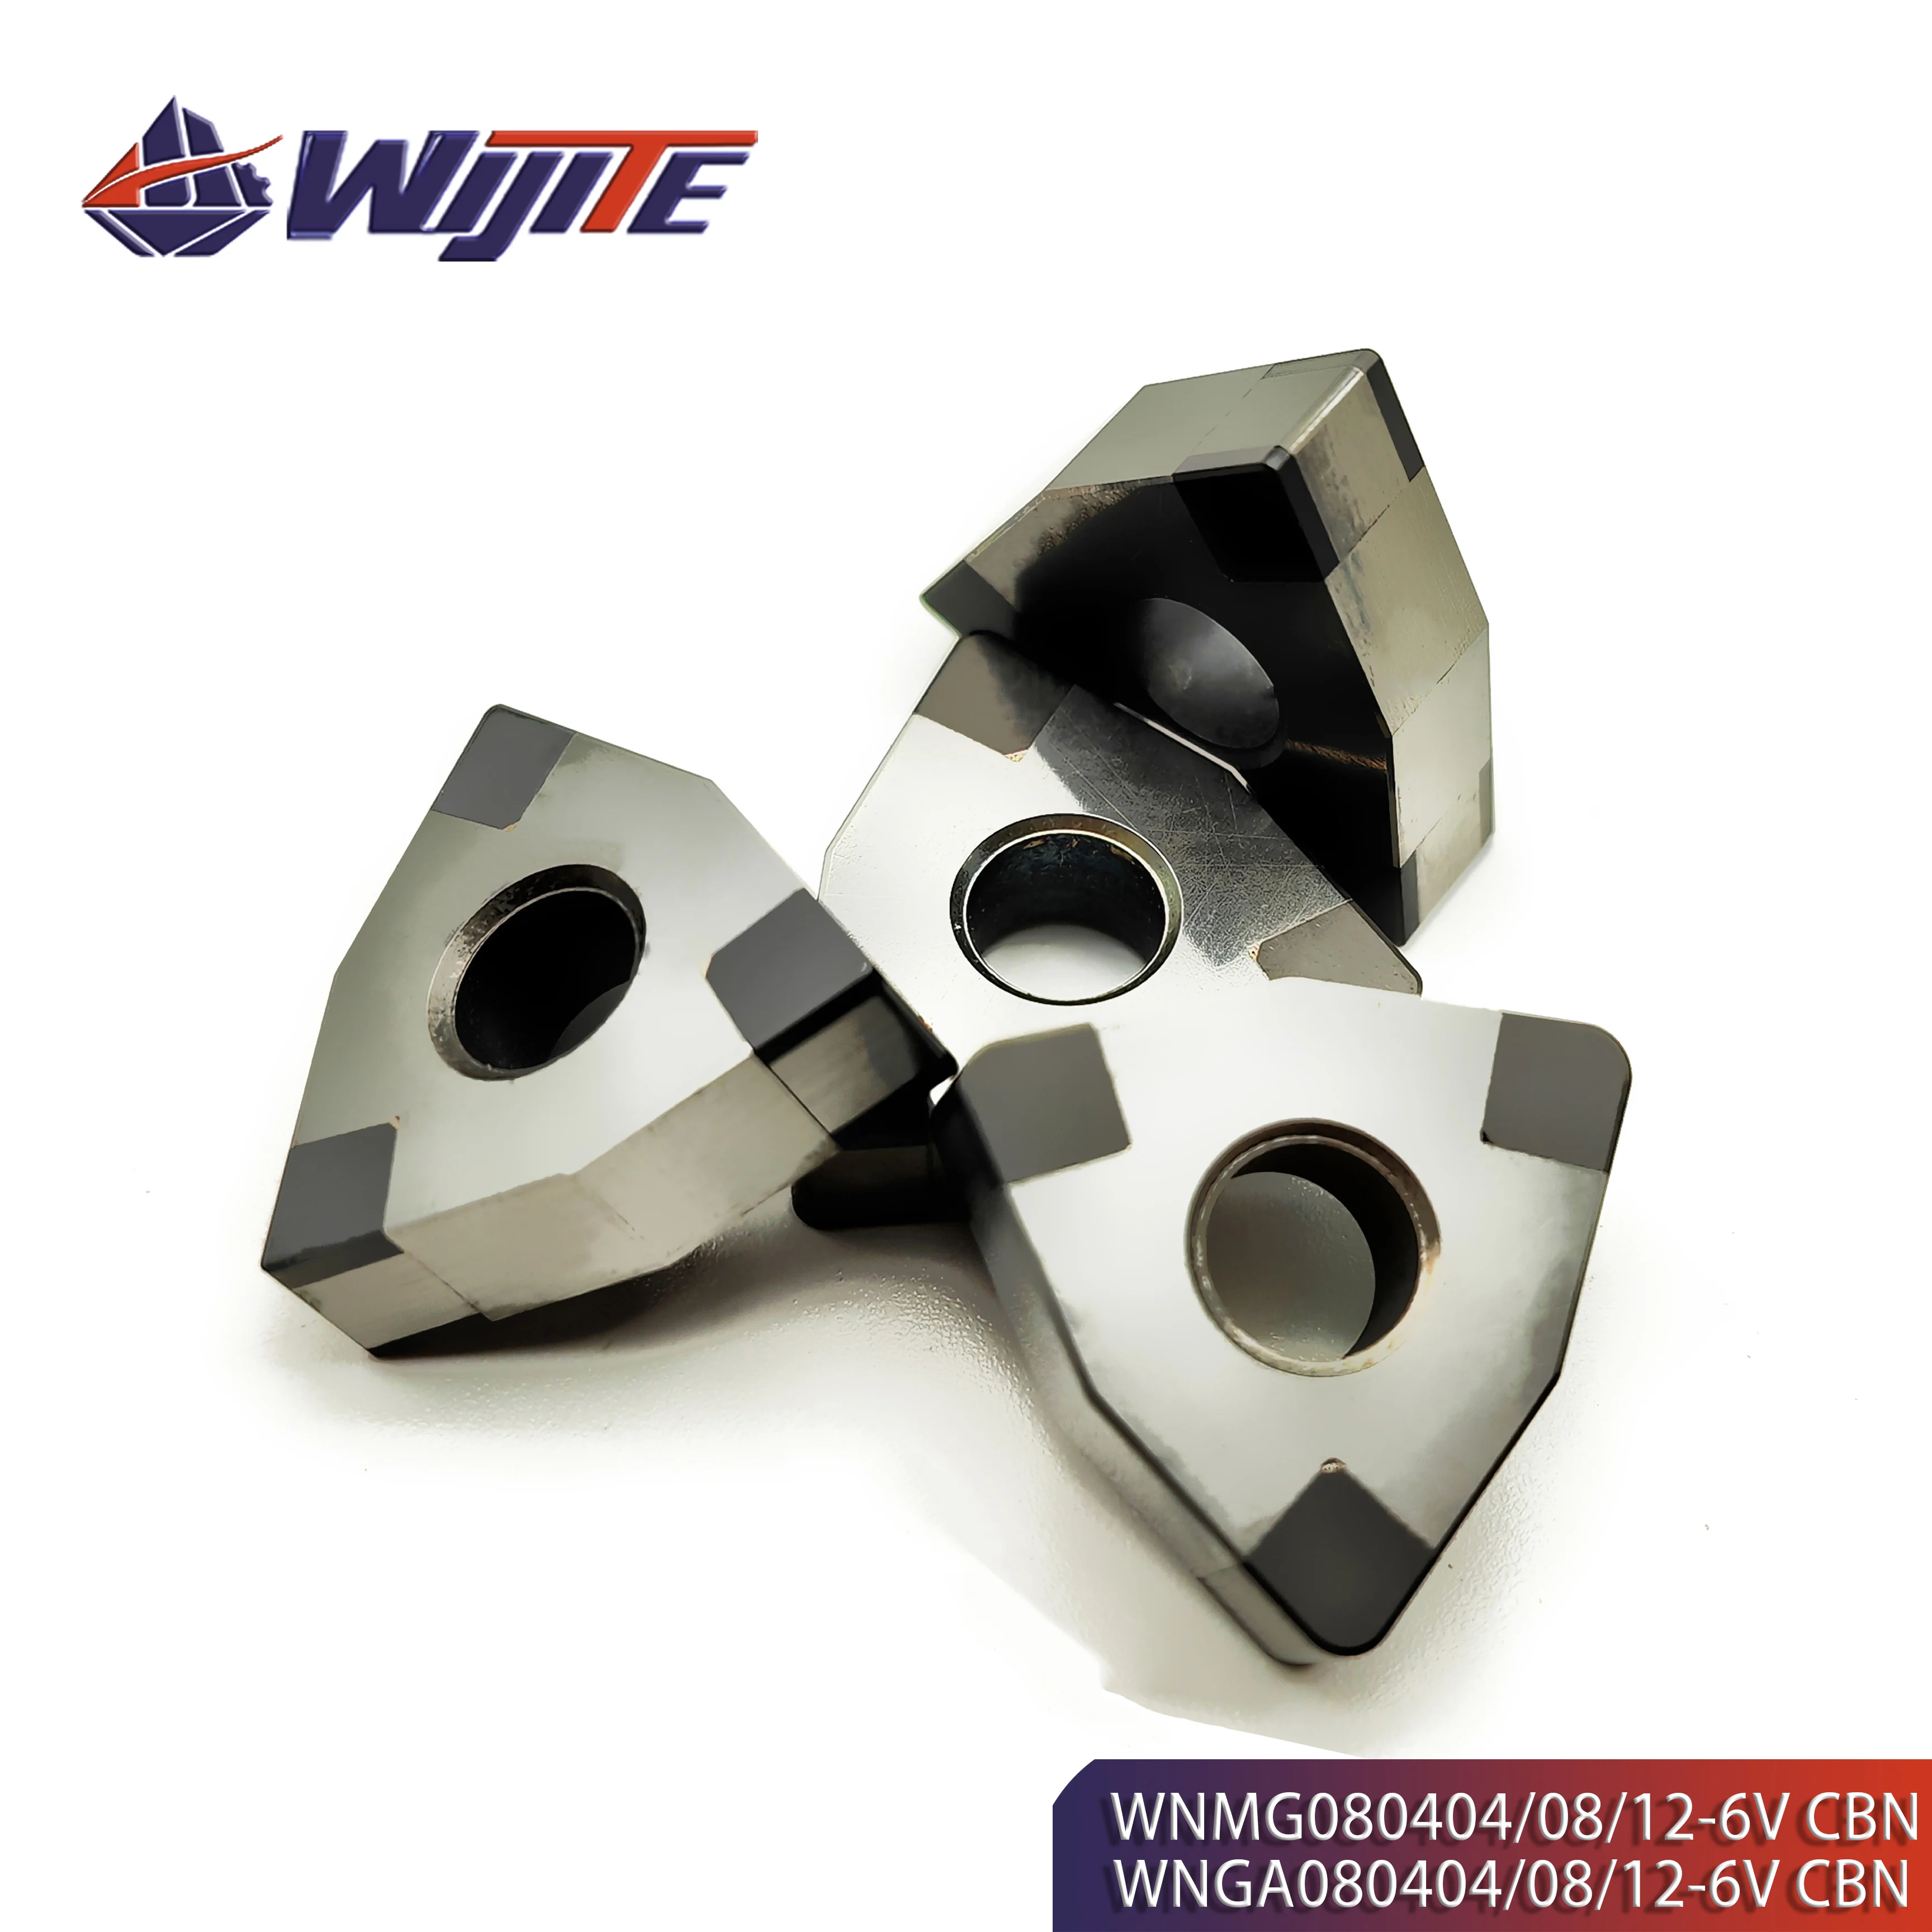 CBN WNGA080404 WNGA080408 WNGA080412-6Vmachine tool is used for turning high hardness materials such as hardened steel cast iron